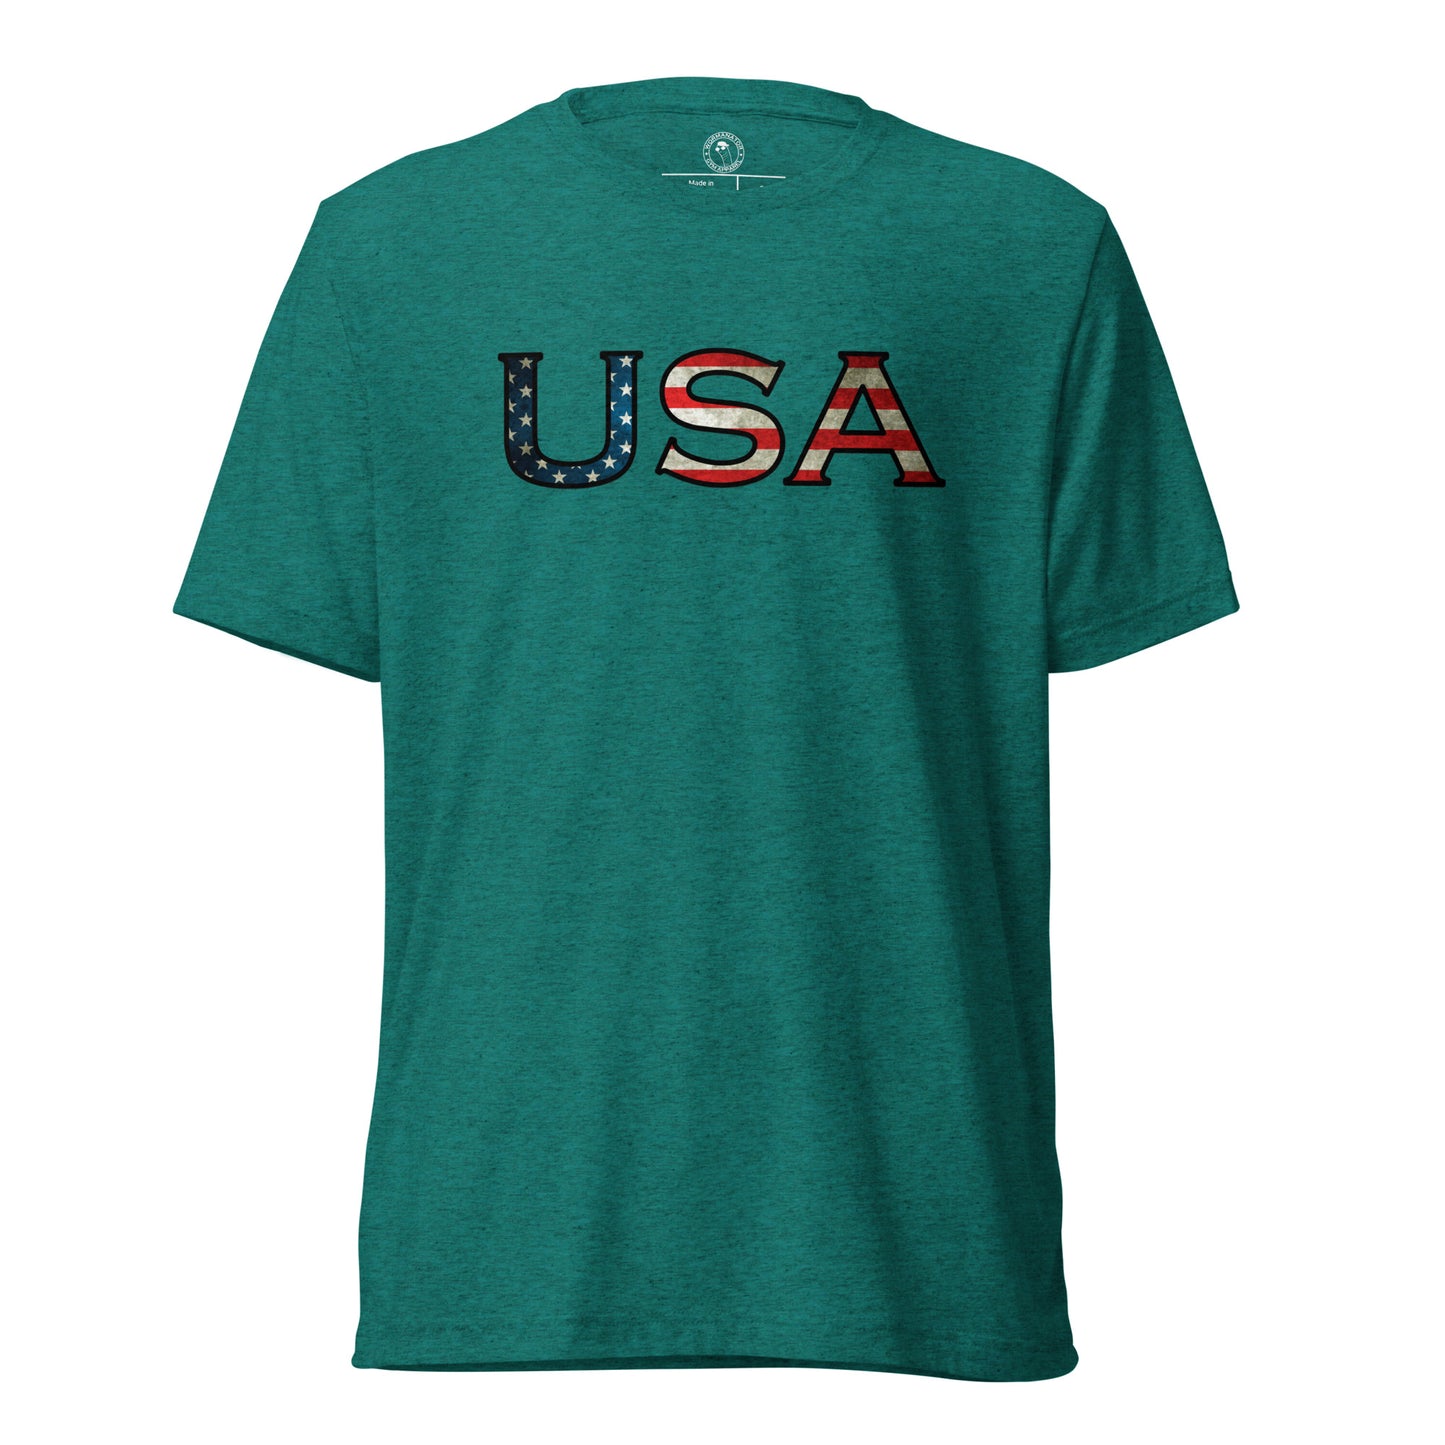 USA T-Shirt in Teal Triblend